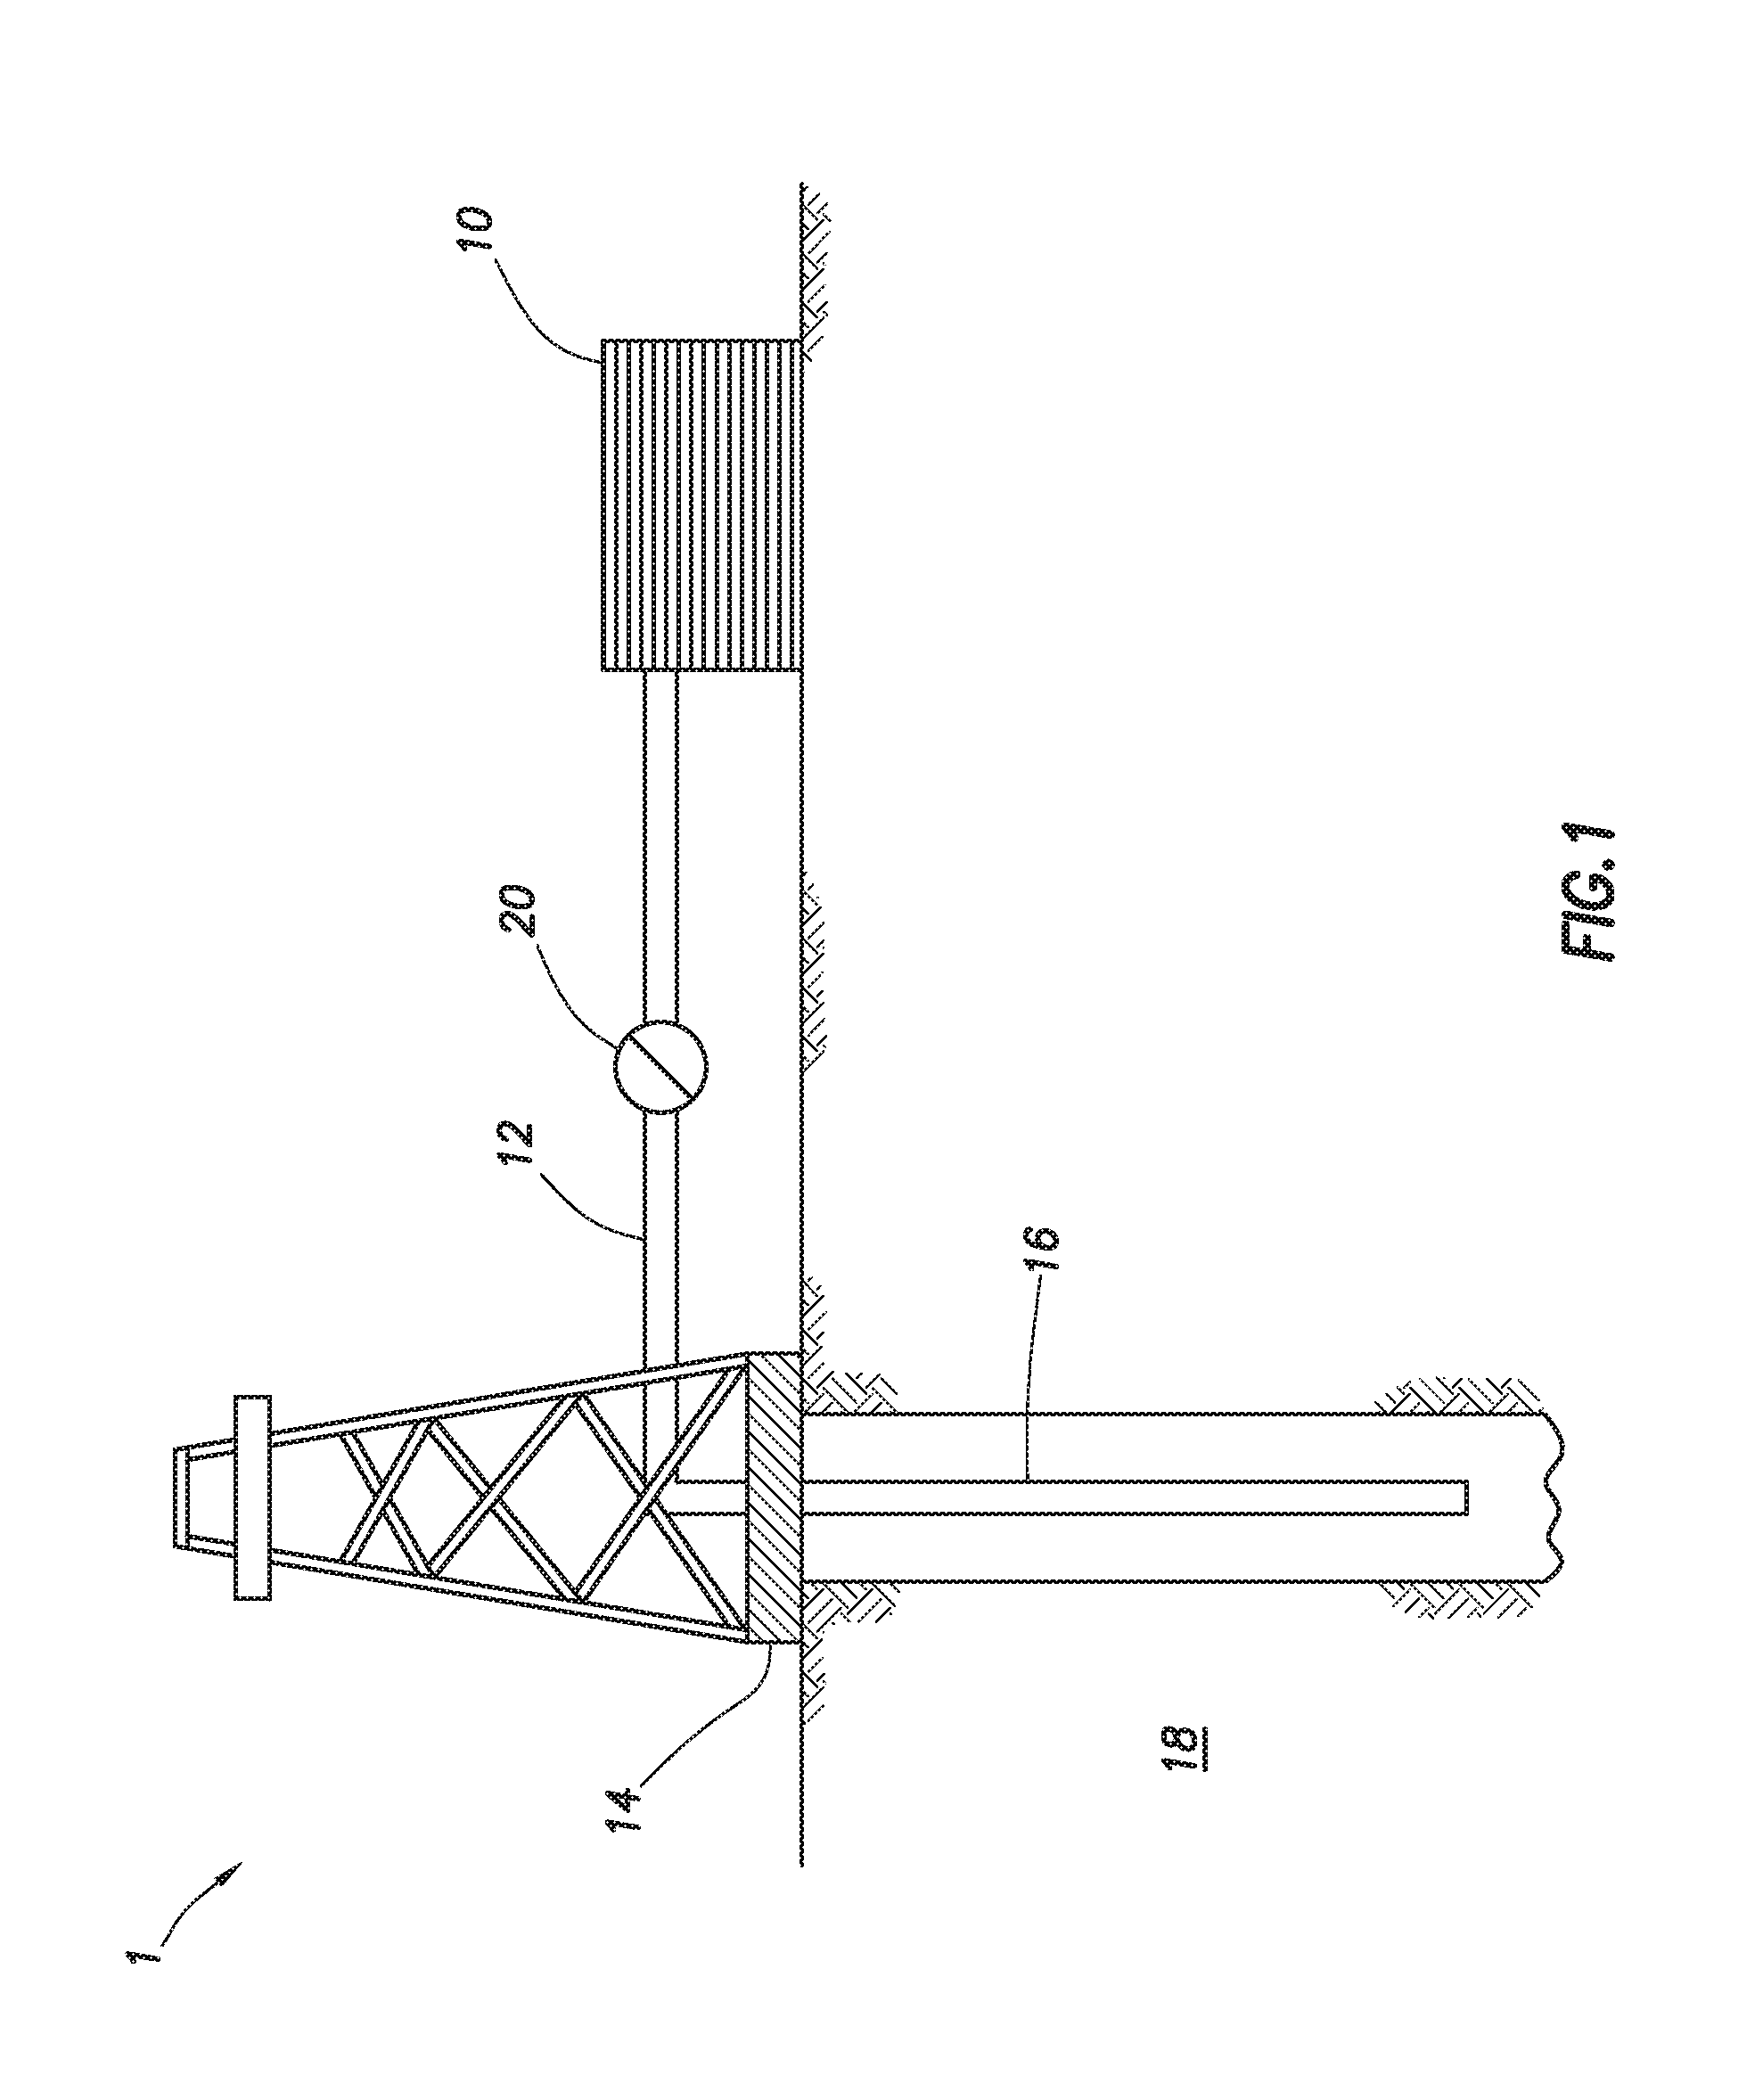 Generating and enhancing microfracture conductivity